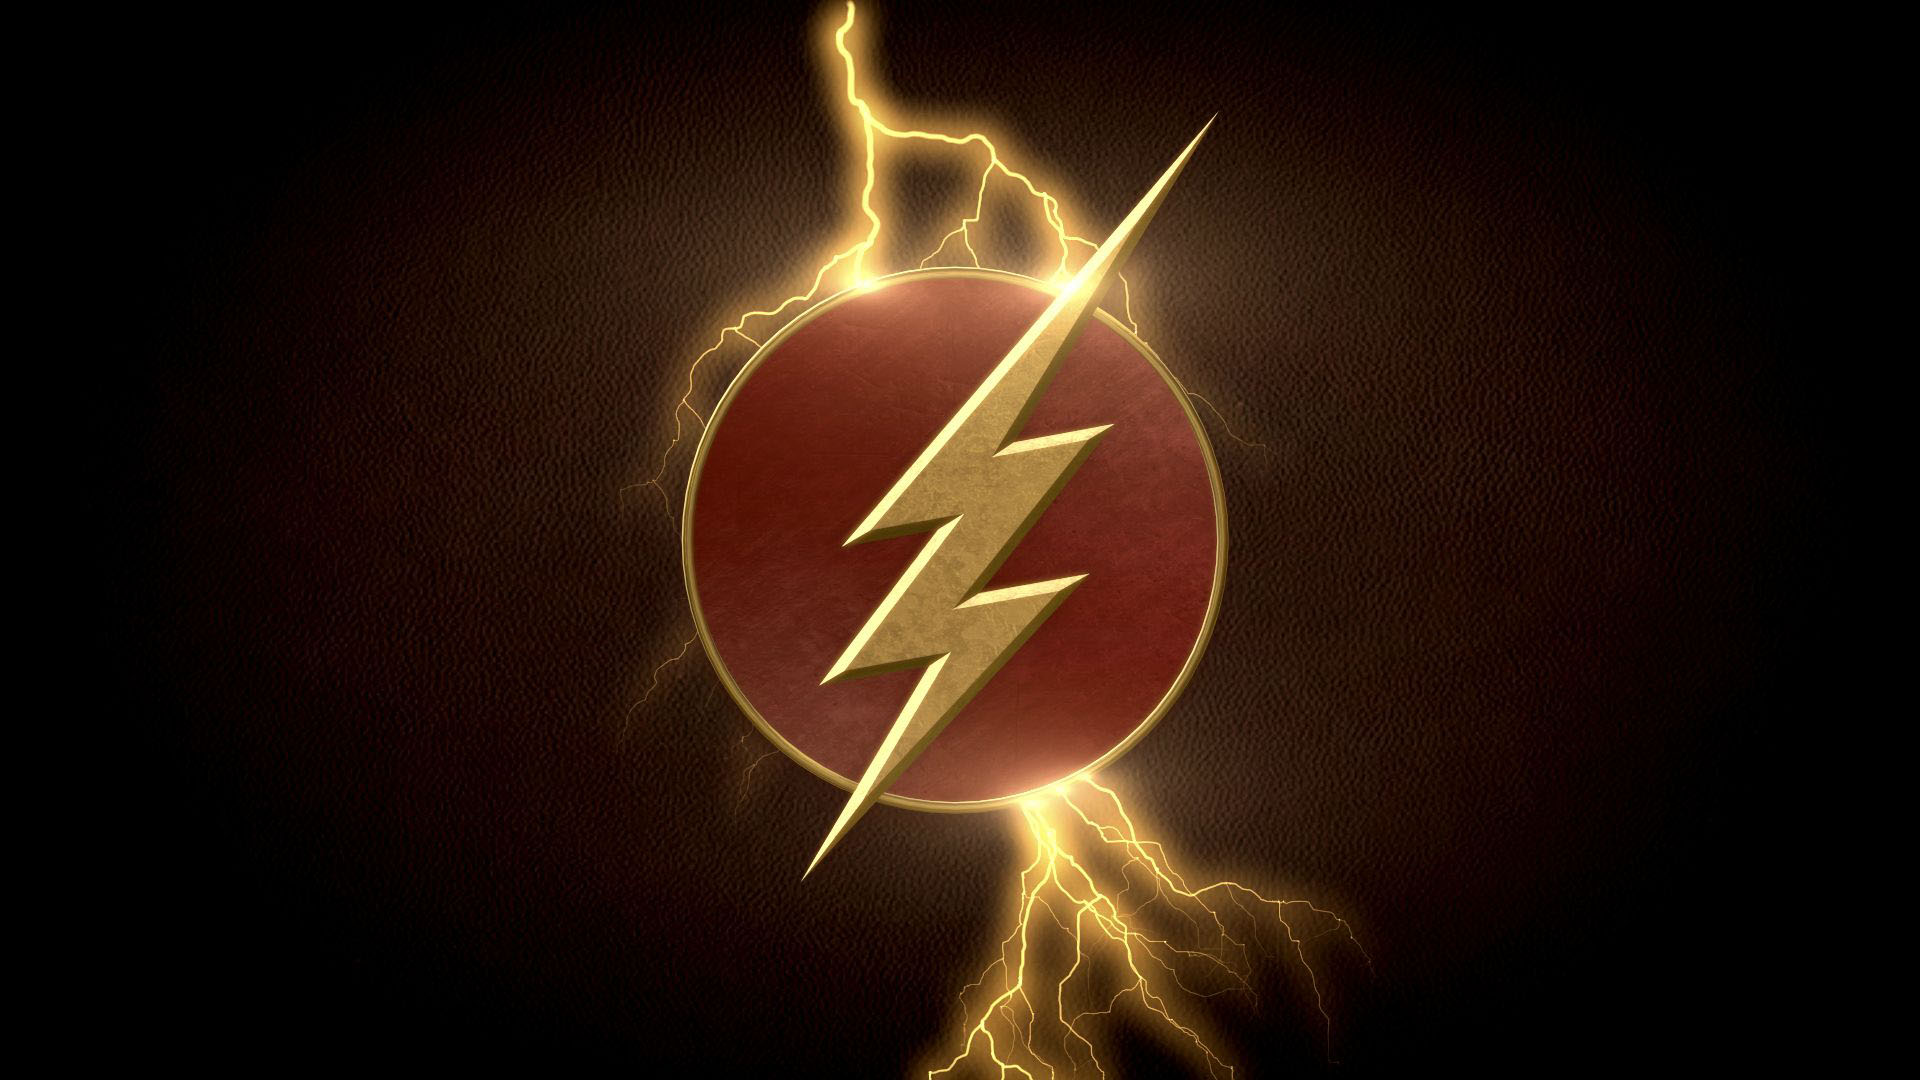 The Flash Symbol Wallpapers